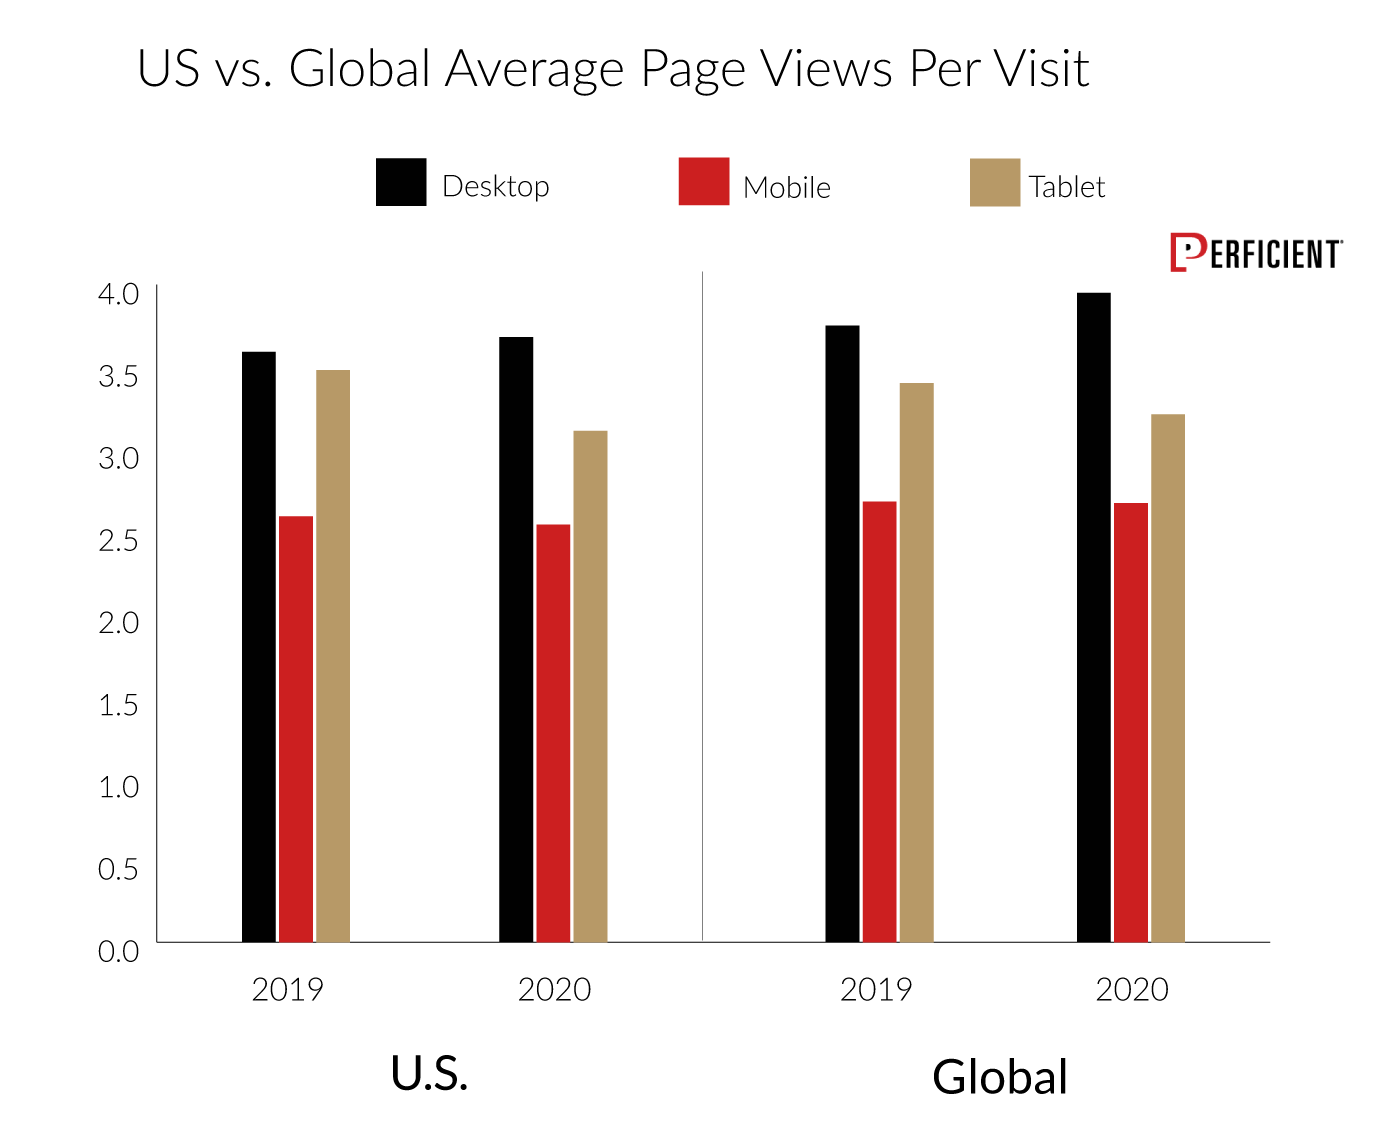 US and Global Average Page Views Per Visit by Device